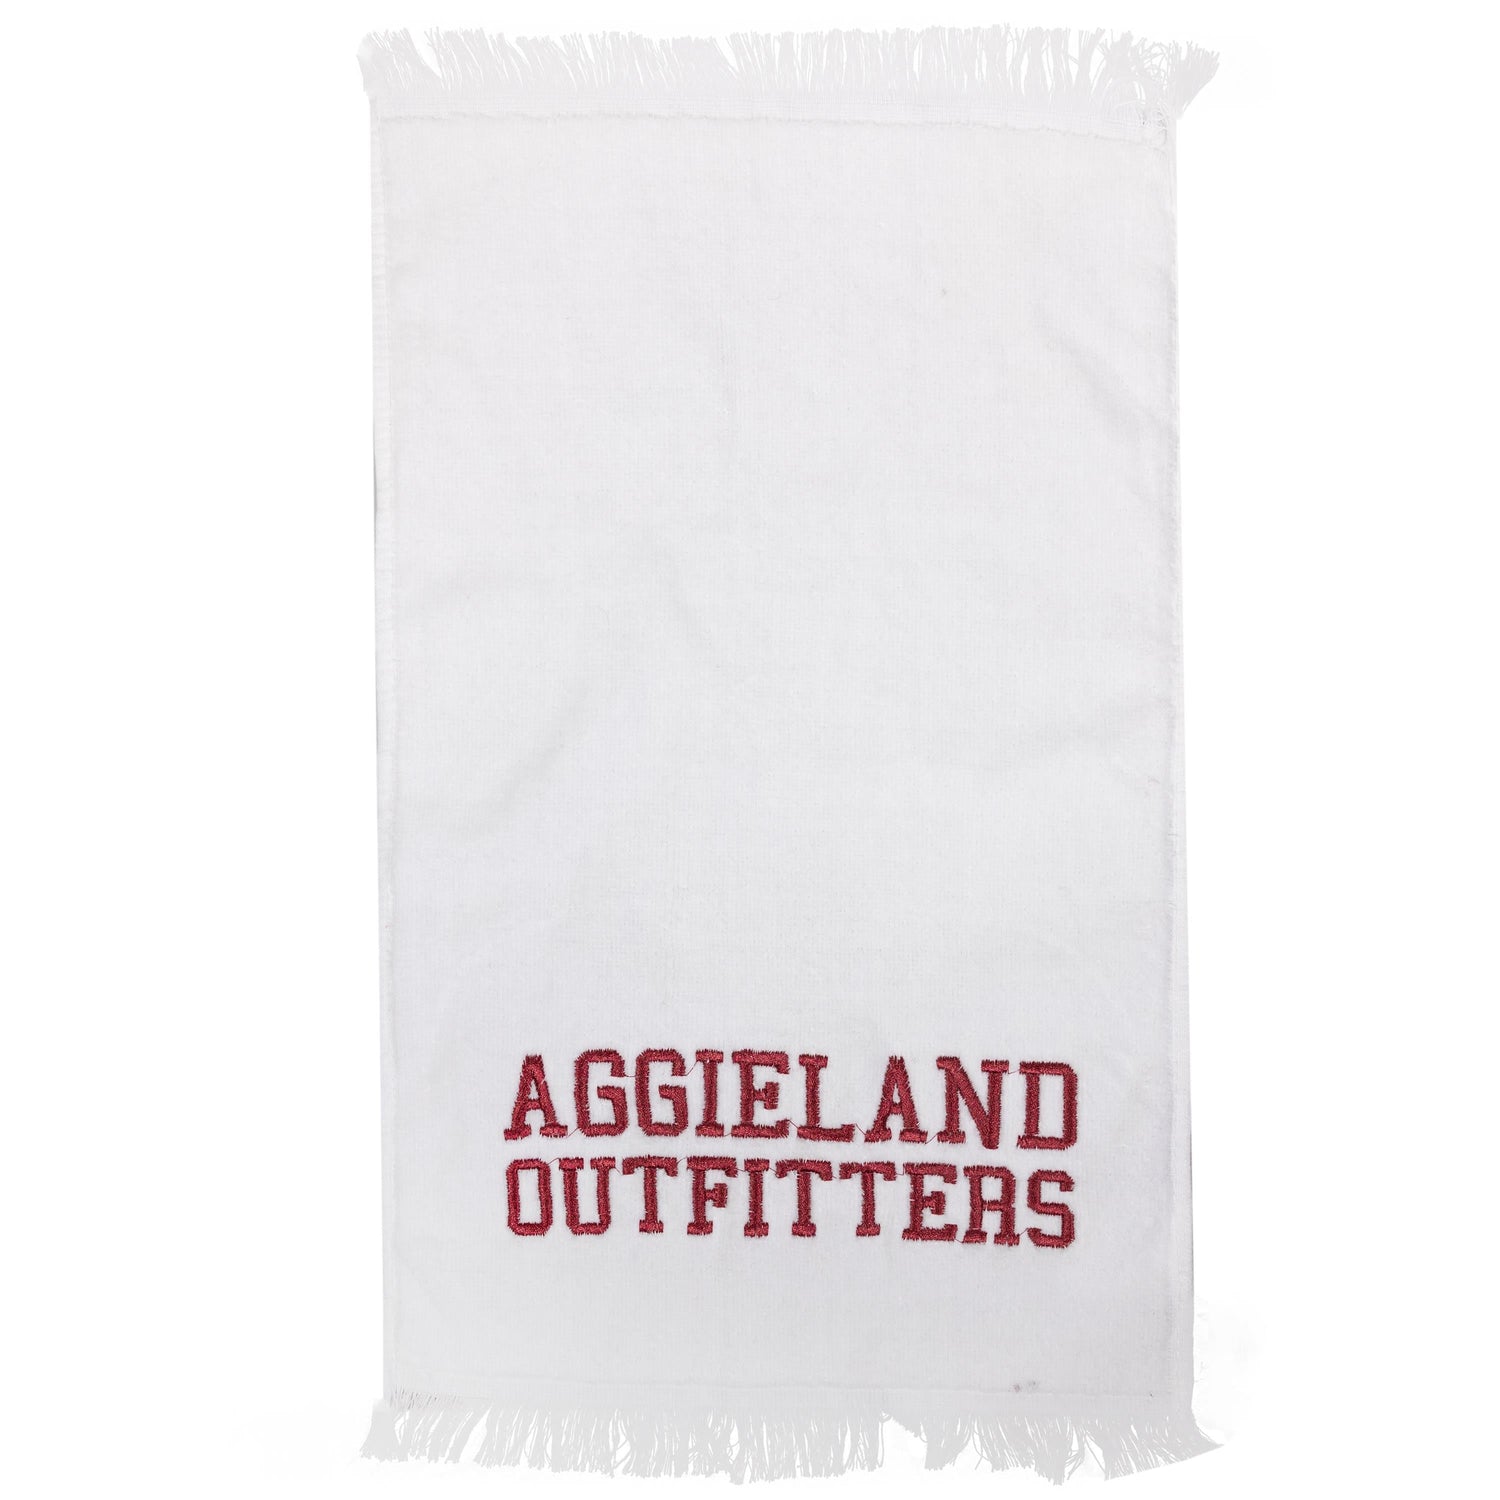 Aggieland Outfitters Embroidered Towel